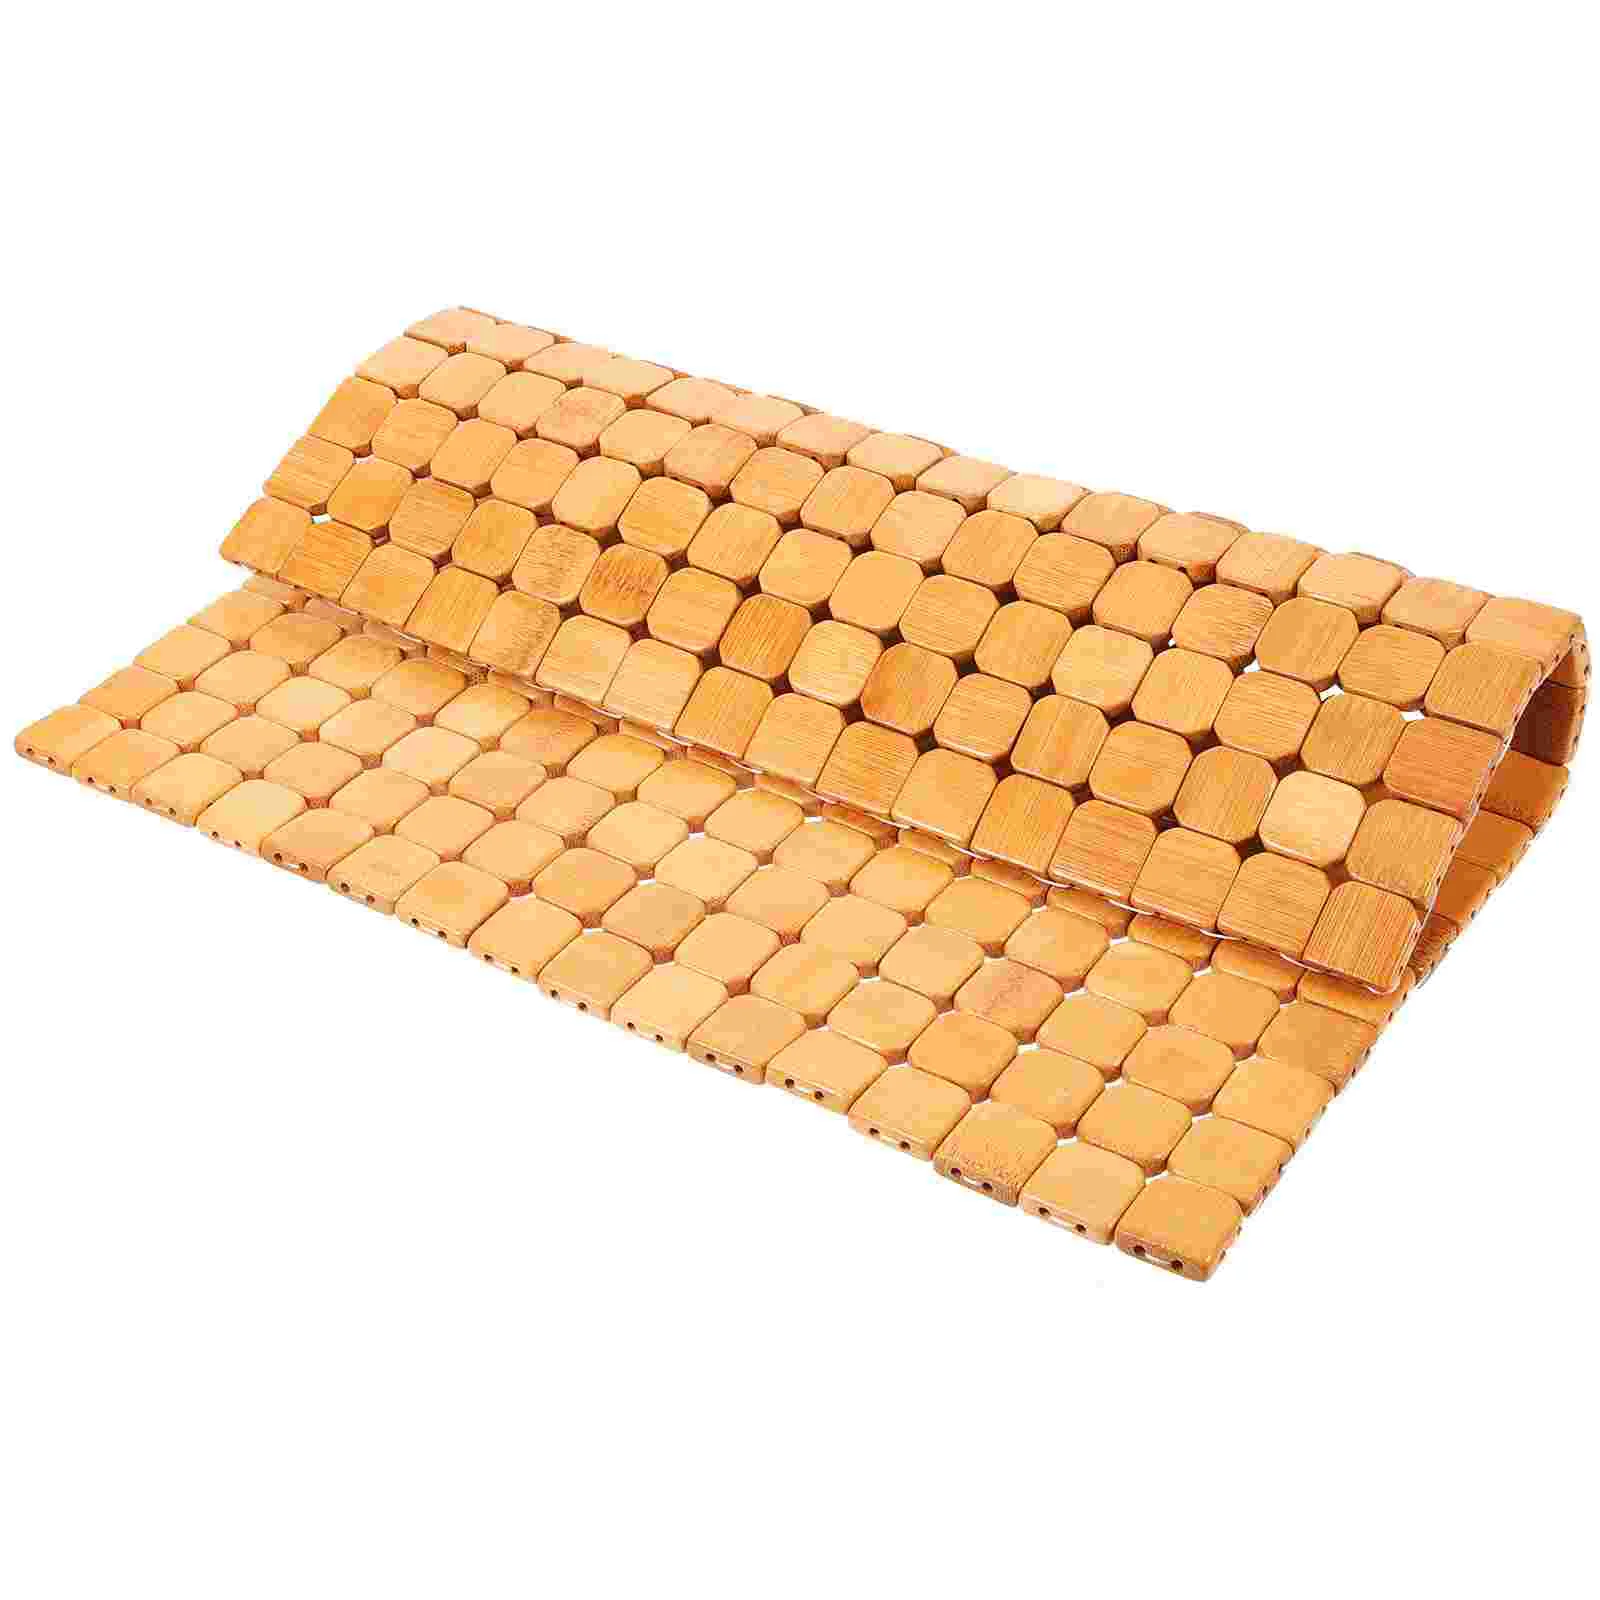 

Bamboo Cool Mat Summer Supplies Seat Cushions Sitting Kids Outdoor Couch Pad Chair Car Bedroom